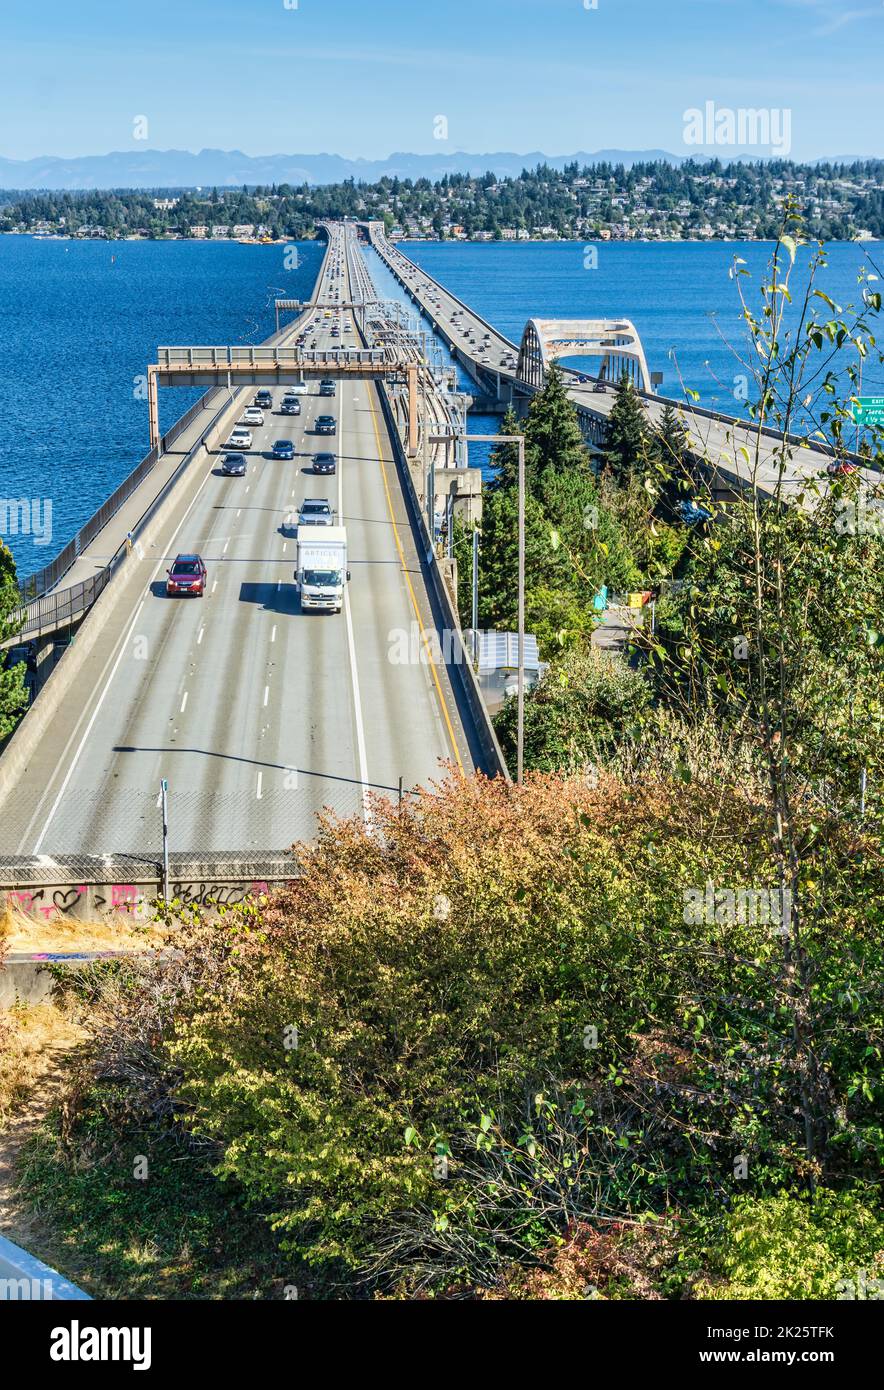 A view from above Interstate Hightway bridges in Seattle, Washington. Stock Photo